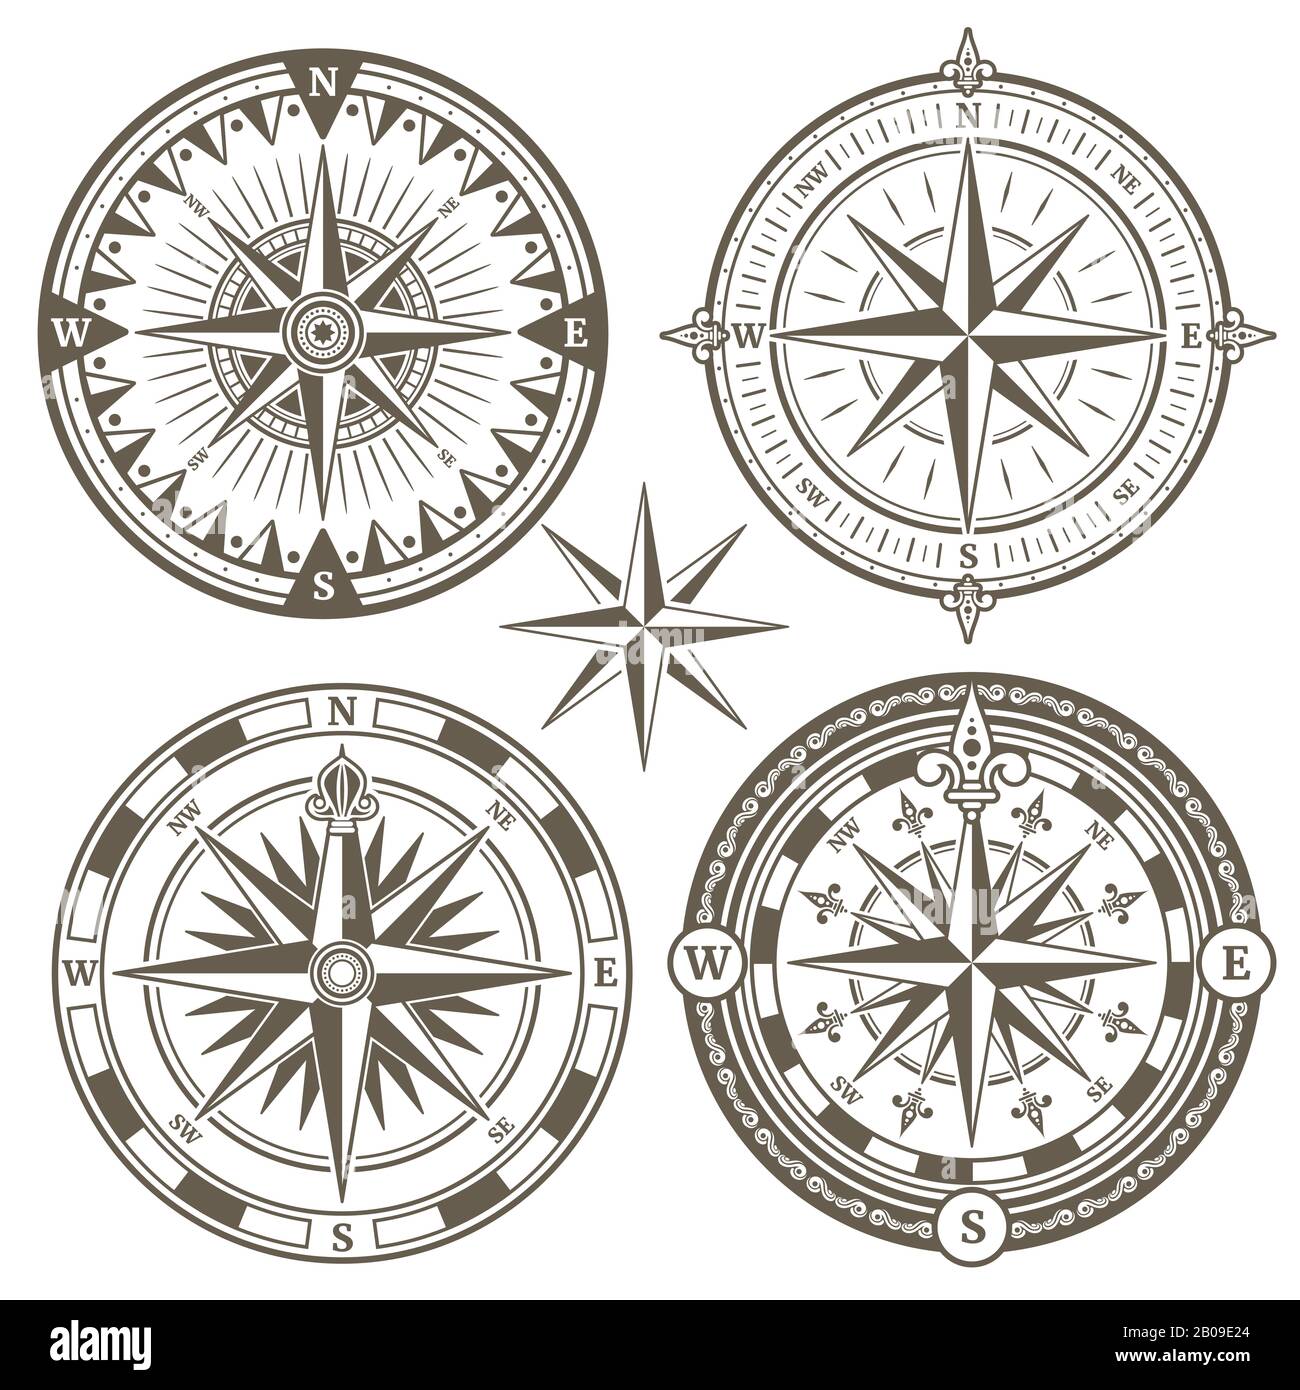 Old sailing marine navigation compass, wind rose vector icons. Set of windrose for navigation in sea, illustration of compass with wind rose Stock Vector